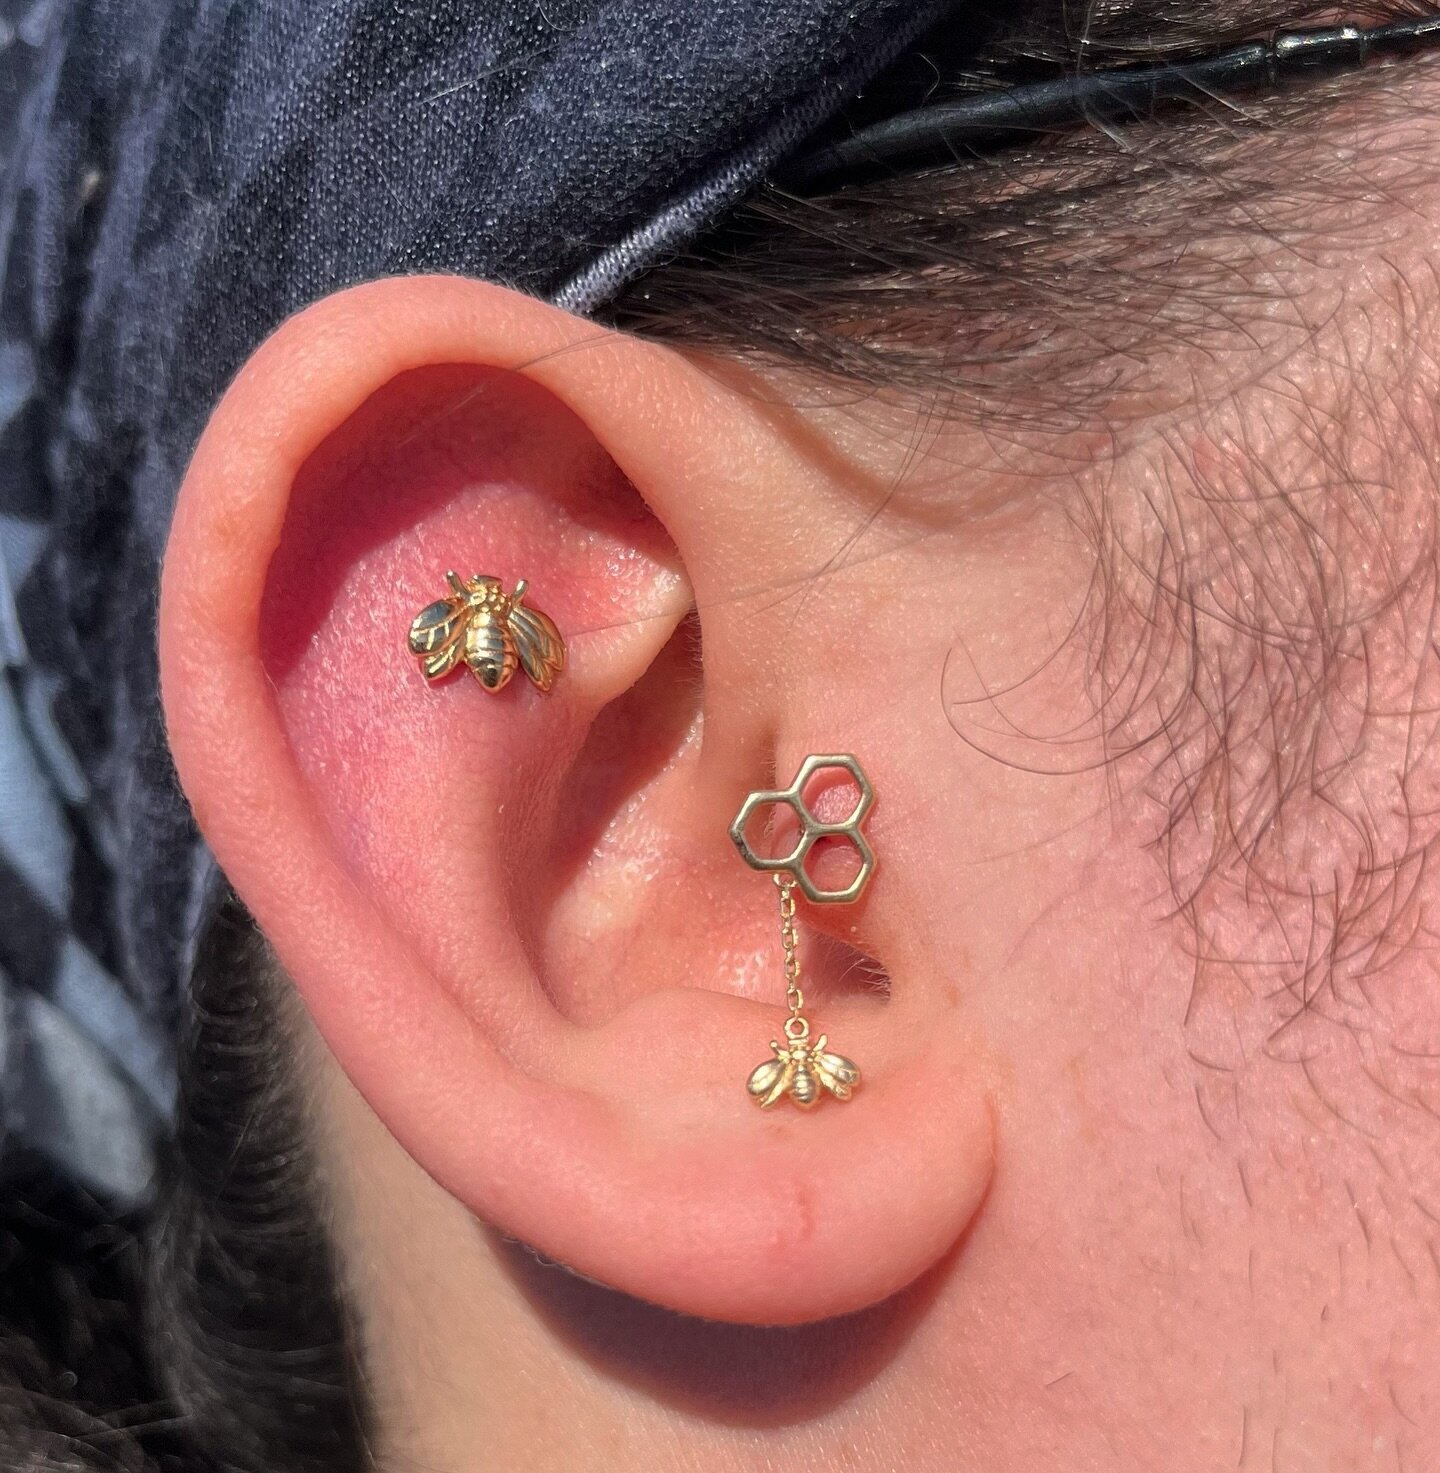 Ear curation in progress 🐝 14kt Gold Bumble Bee x 14kt Gold Honey Comb Dangle
Done by @izzy_tattoo_3 
.
.
.
#earcuration #14ktgold #honeybee #bodymods #piercing #earmapping #gta #brampton #bramptontattoo #bramptonpiercing